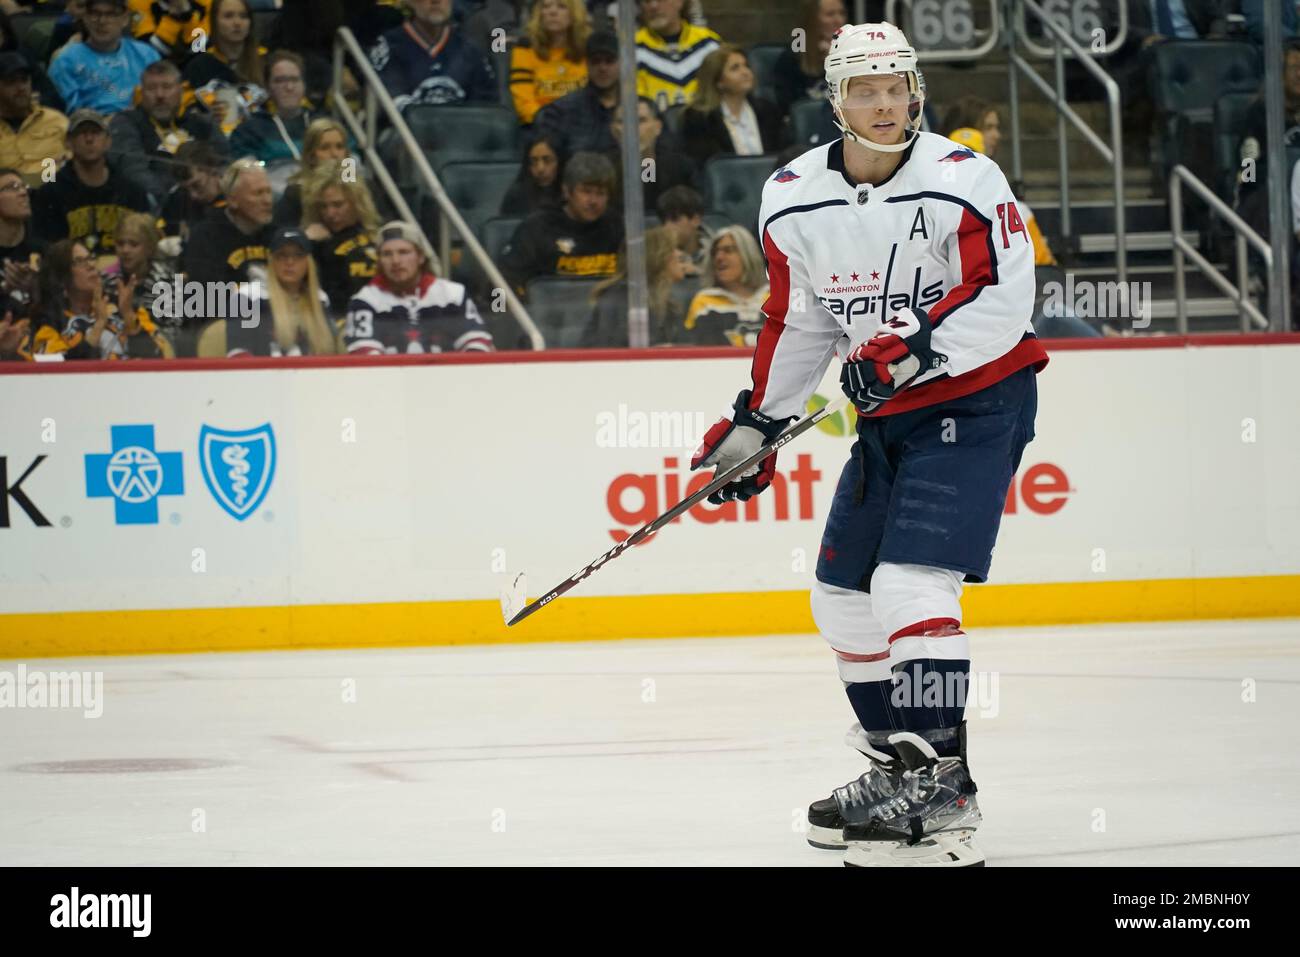 Washington Capitals John Carlson (74) plays against the Pittsburgh Penguins during the second period of an NHL hockey game, Saturday, April 9, 2022, in Pittsburgh